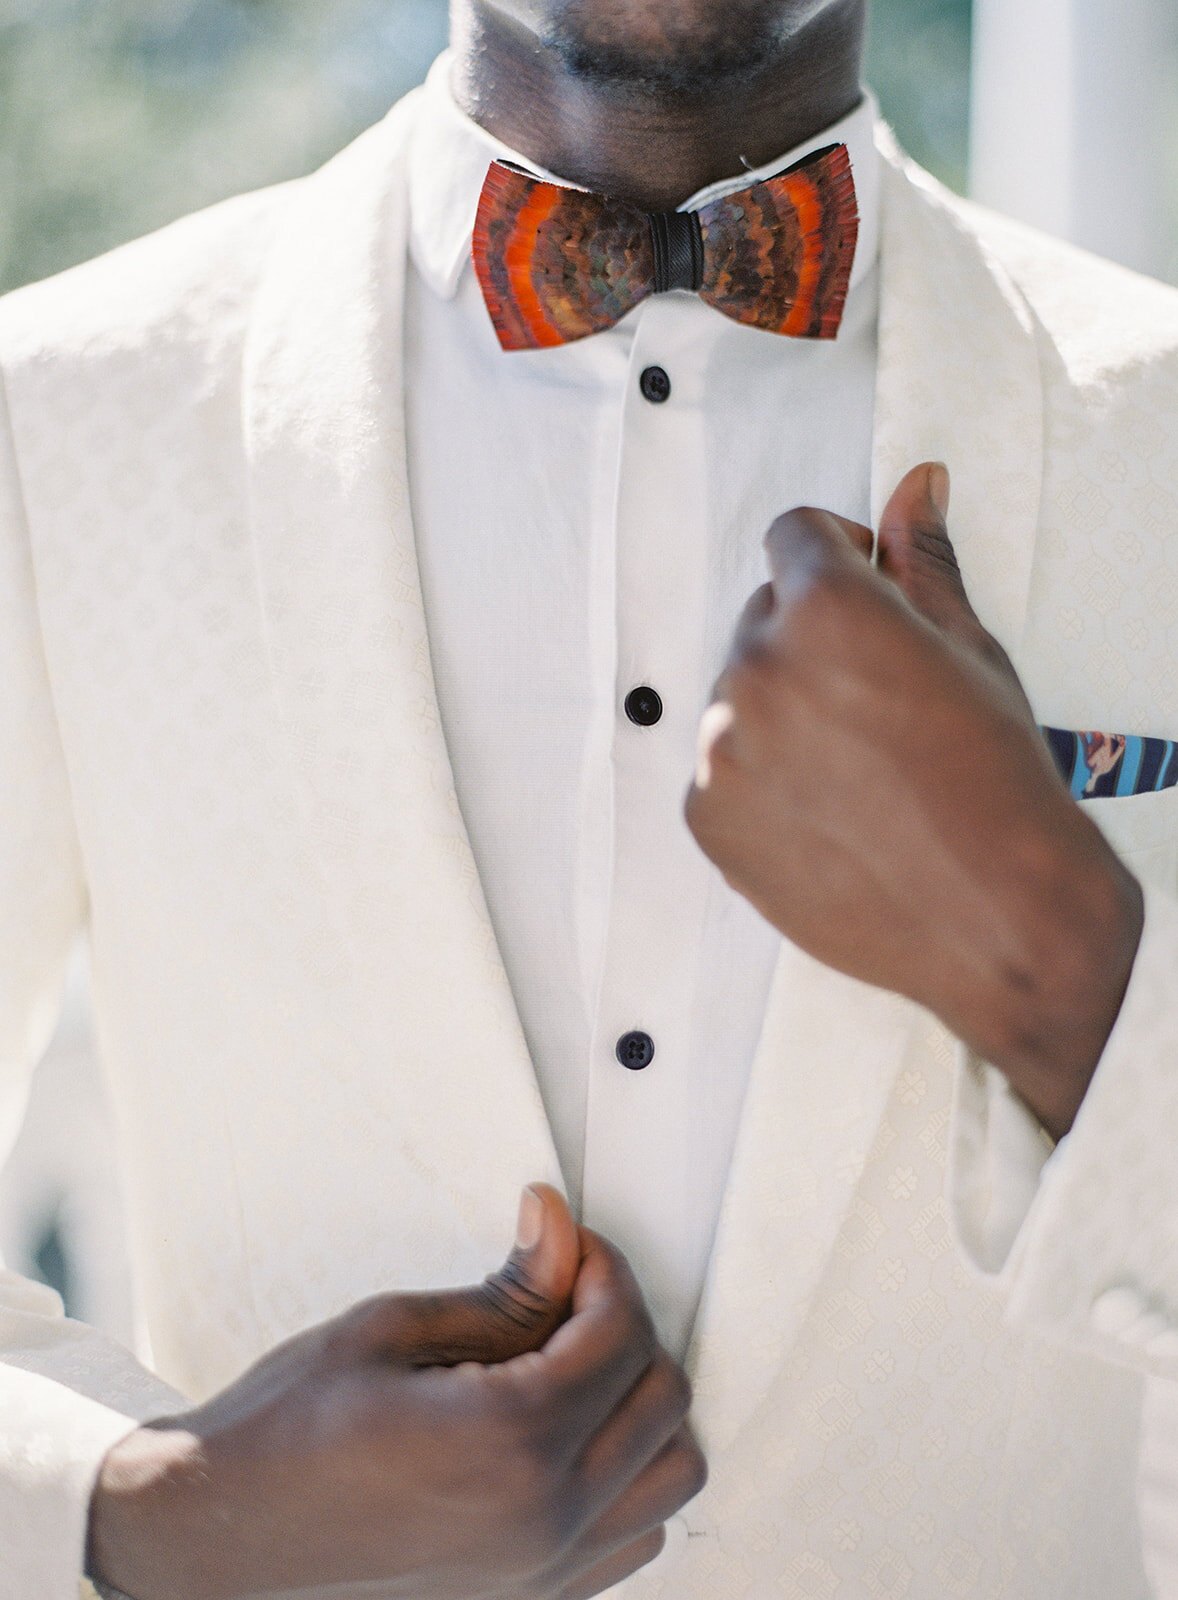 Chest of groom in an ivory and gold detailed tuxedo. He is holding one hand high up on his lapel and the other hand lower on a lapel. He has on a white tuxedo shirt and red pheasant bowtie. Photographed by wedding photographers in Charleston Amy Mulder Photography.